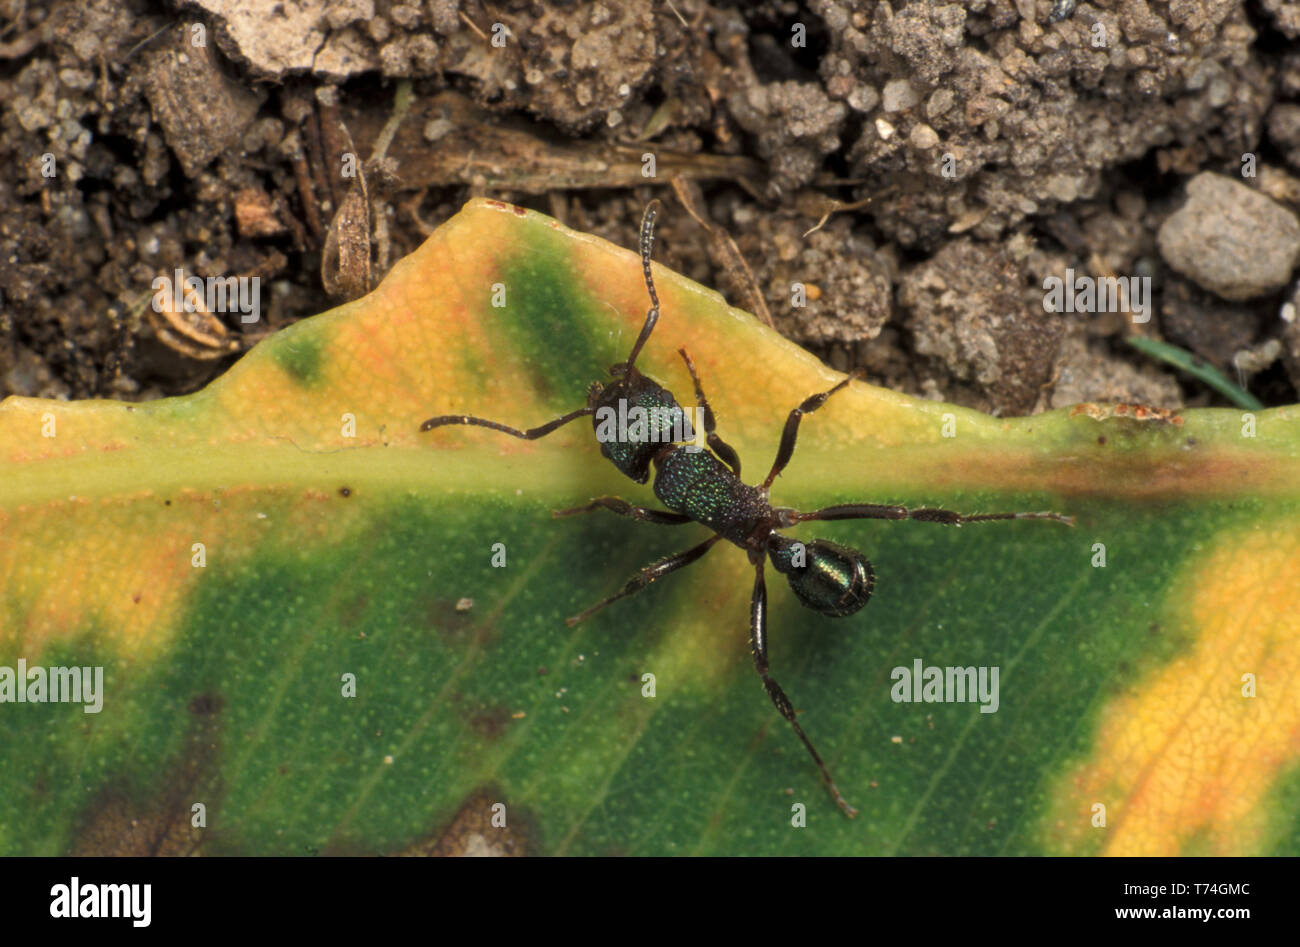 GREEN-HEAD ANT (ADULT, THYTIDOPONERA) ALSO KNOWN AS GREEN ANT OR METALLIC PONY ANT Stock Photo